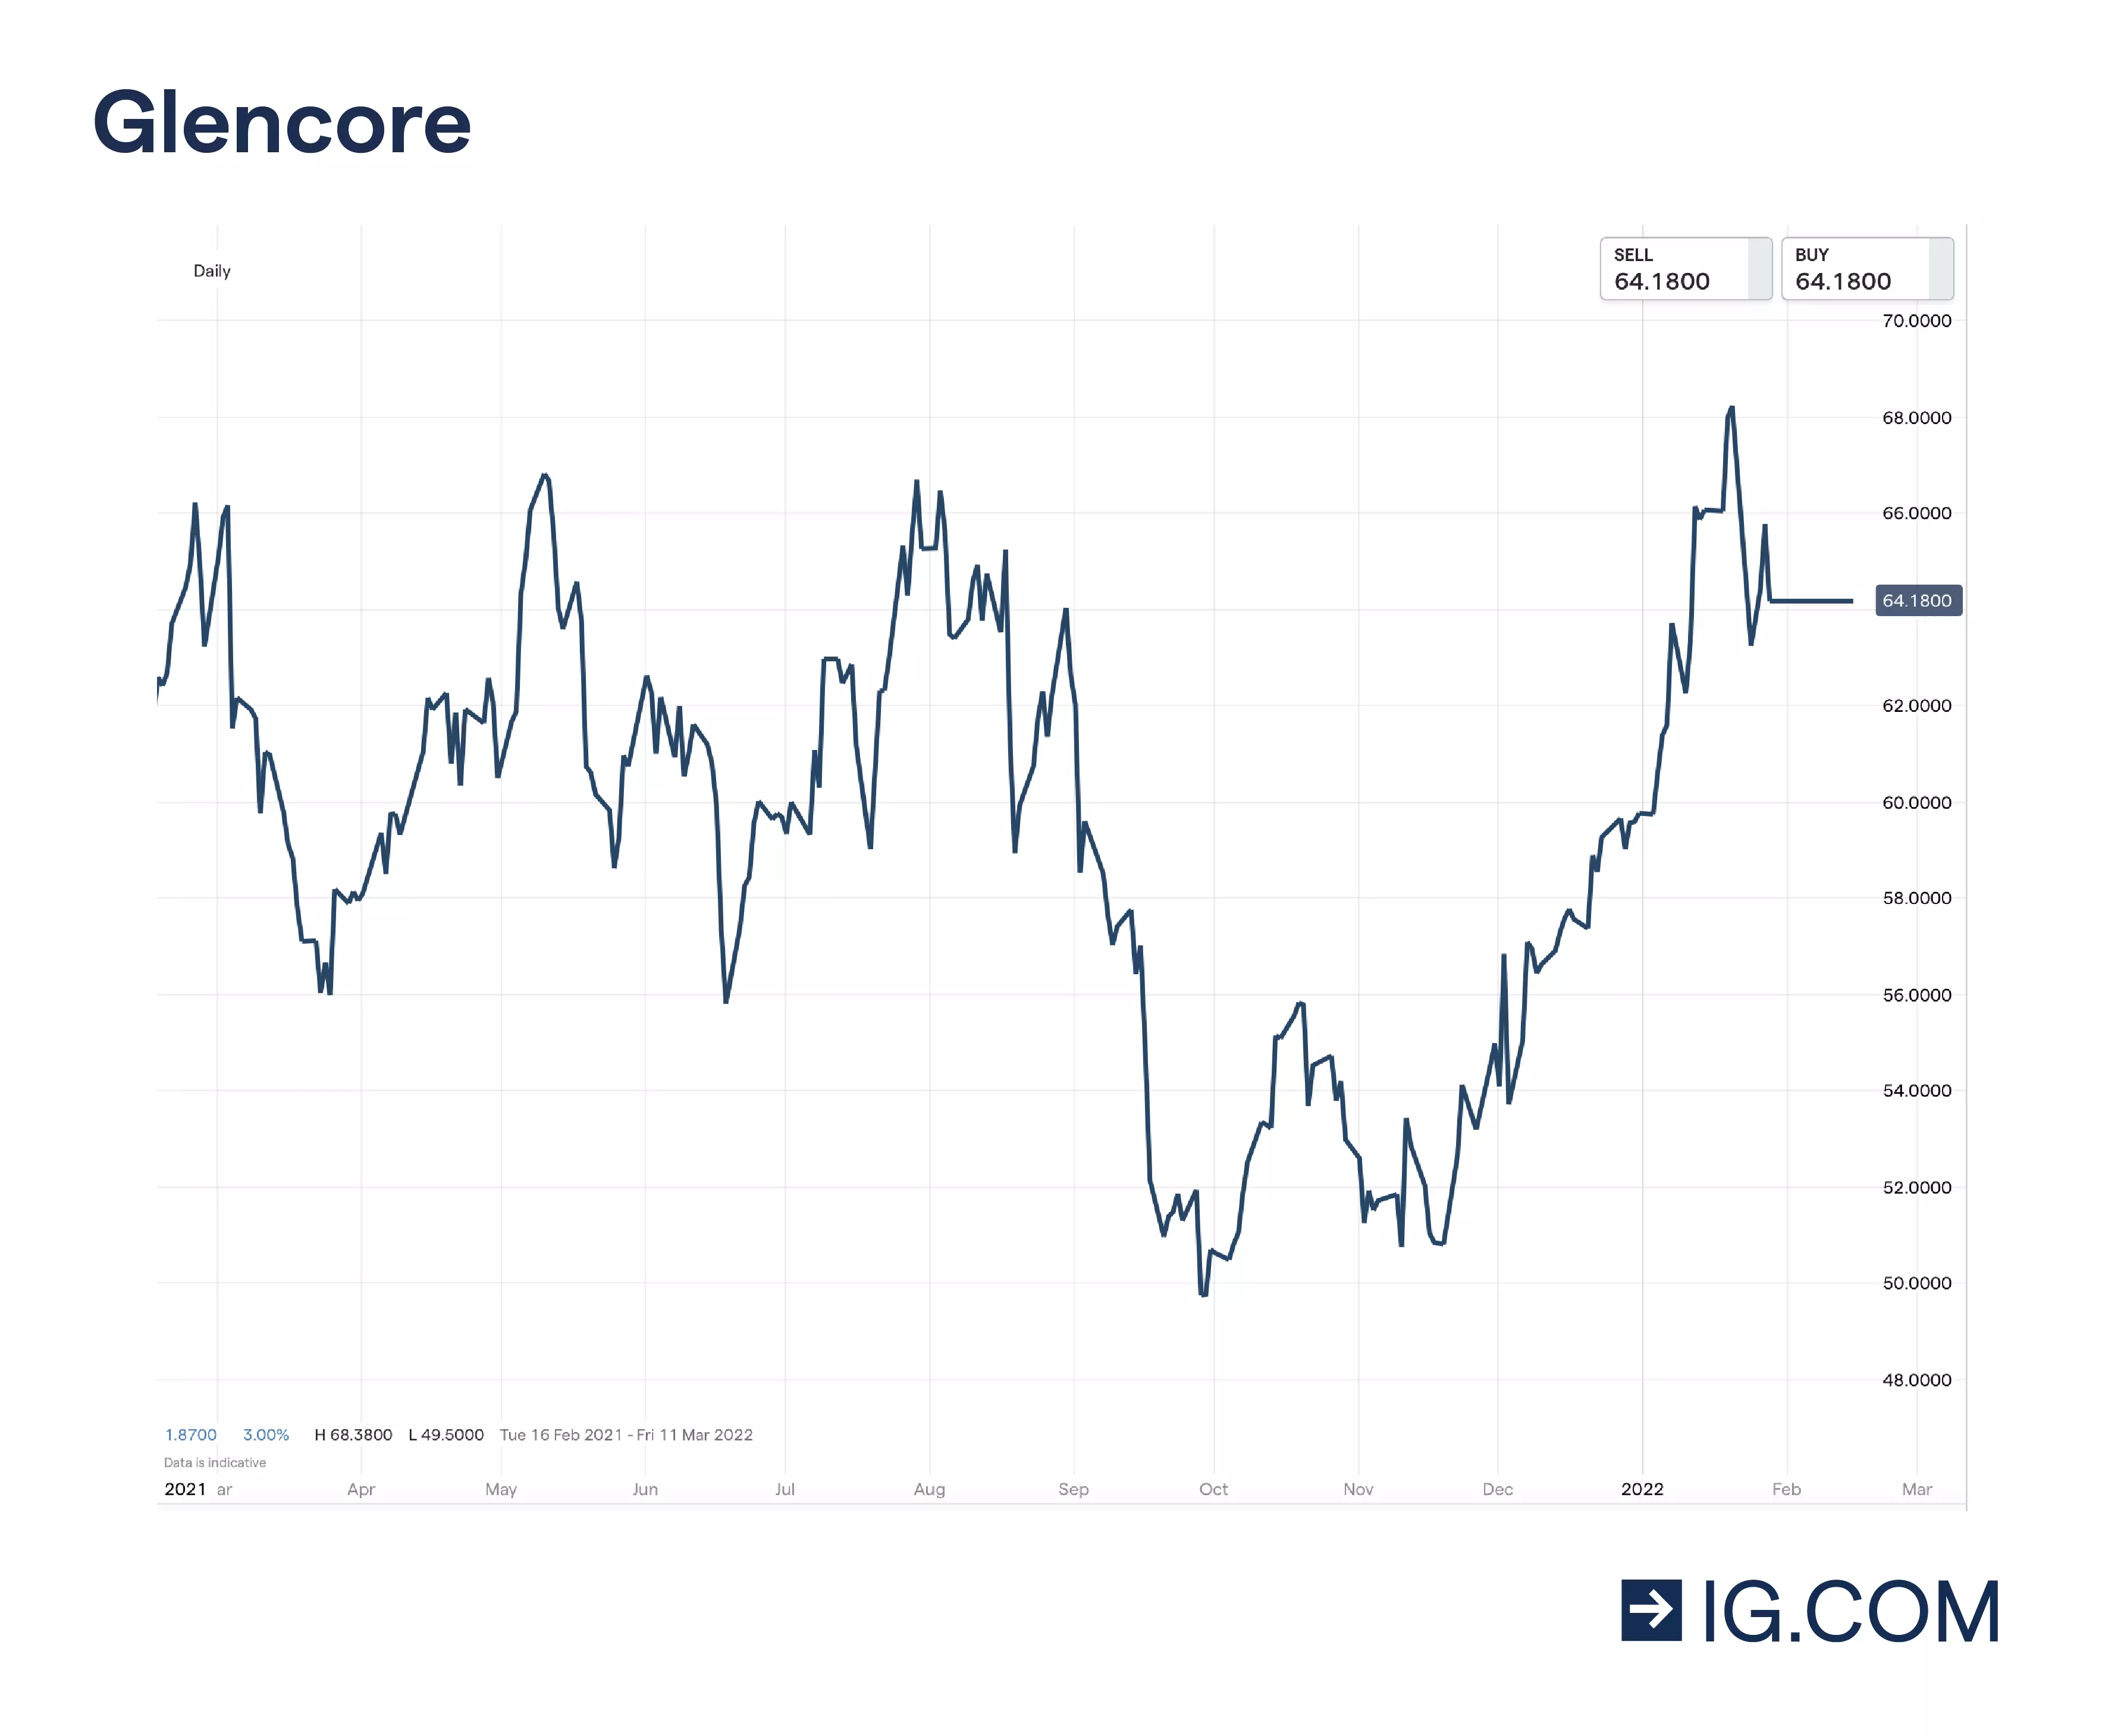 Glencore stock chart representing highs and lows in the share prices in the last 12 months